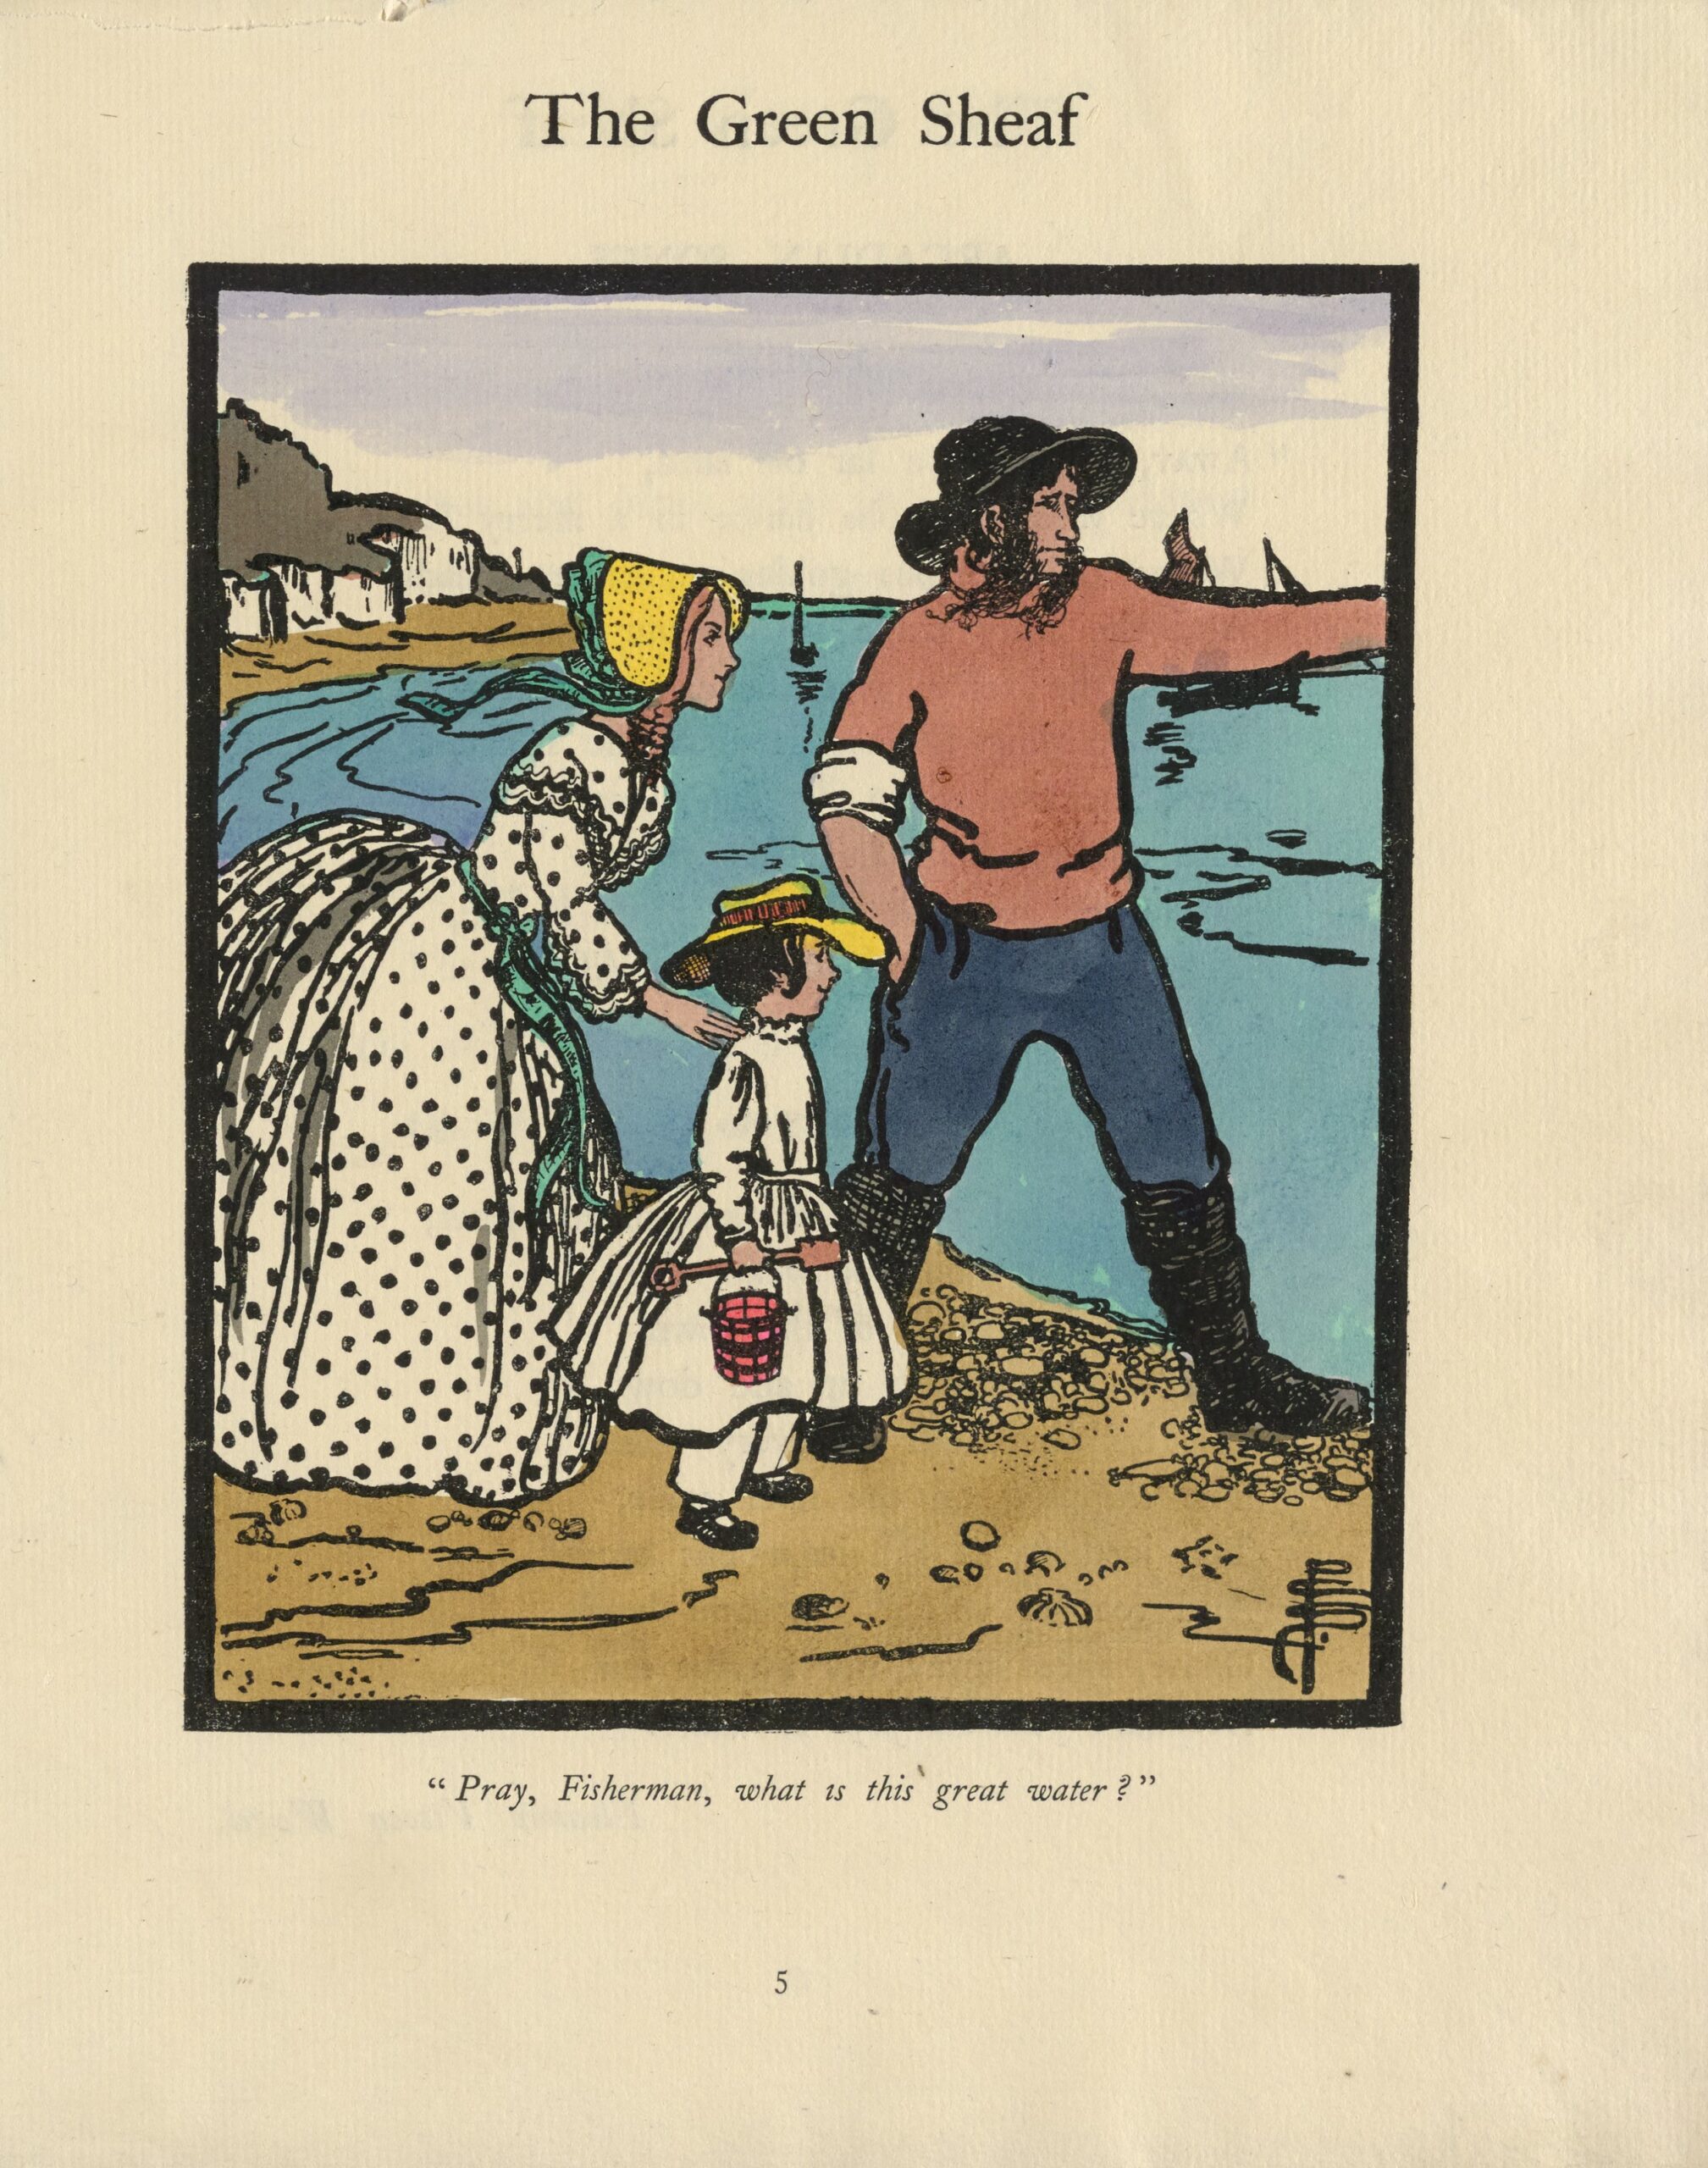 The hand-coloured full-page illustration has a black rectangular border, in portrait orientation. The image illustrates Barbauld’s “Charles at the Seaside,” from earlier in the volume. In the foreground, three figures stand in profile, facing right, upon a golden beach by the blue sea. From left to right: a pale-skinned woman in a dotted white dress with green ribbons wears a yellow sunbonnet with green ribbons which reveals her pink curls; a pale-skinned little boy in a yellow sun hat, white dress, and black buckled shoes carries a red pail and spade; and a pale-skinned fisherman in a black sou’wester hat, with long sideburns, red shirt, blue trousers, and black boots, his arm raised to point at something out of frame. Behind them are white cliffs, sailing ships, and a purple sky. The artist’s monogram is in the bottom right corner of the frame.